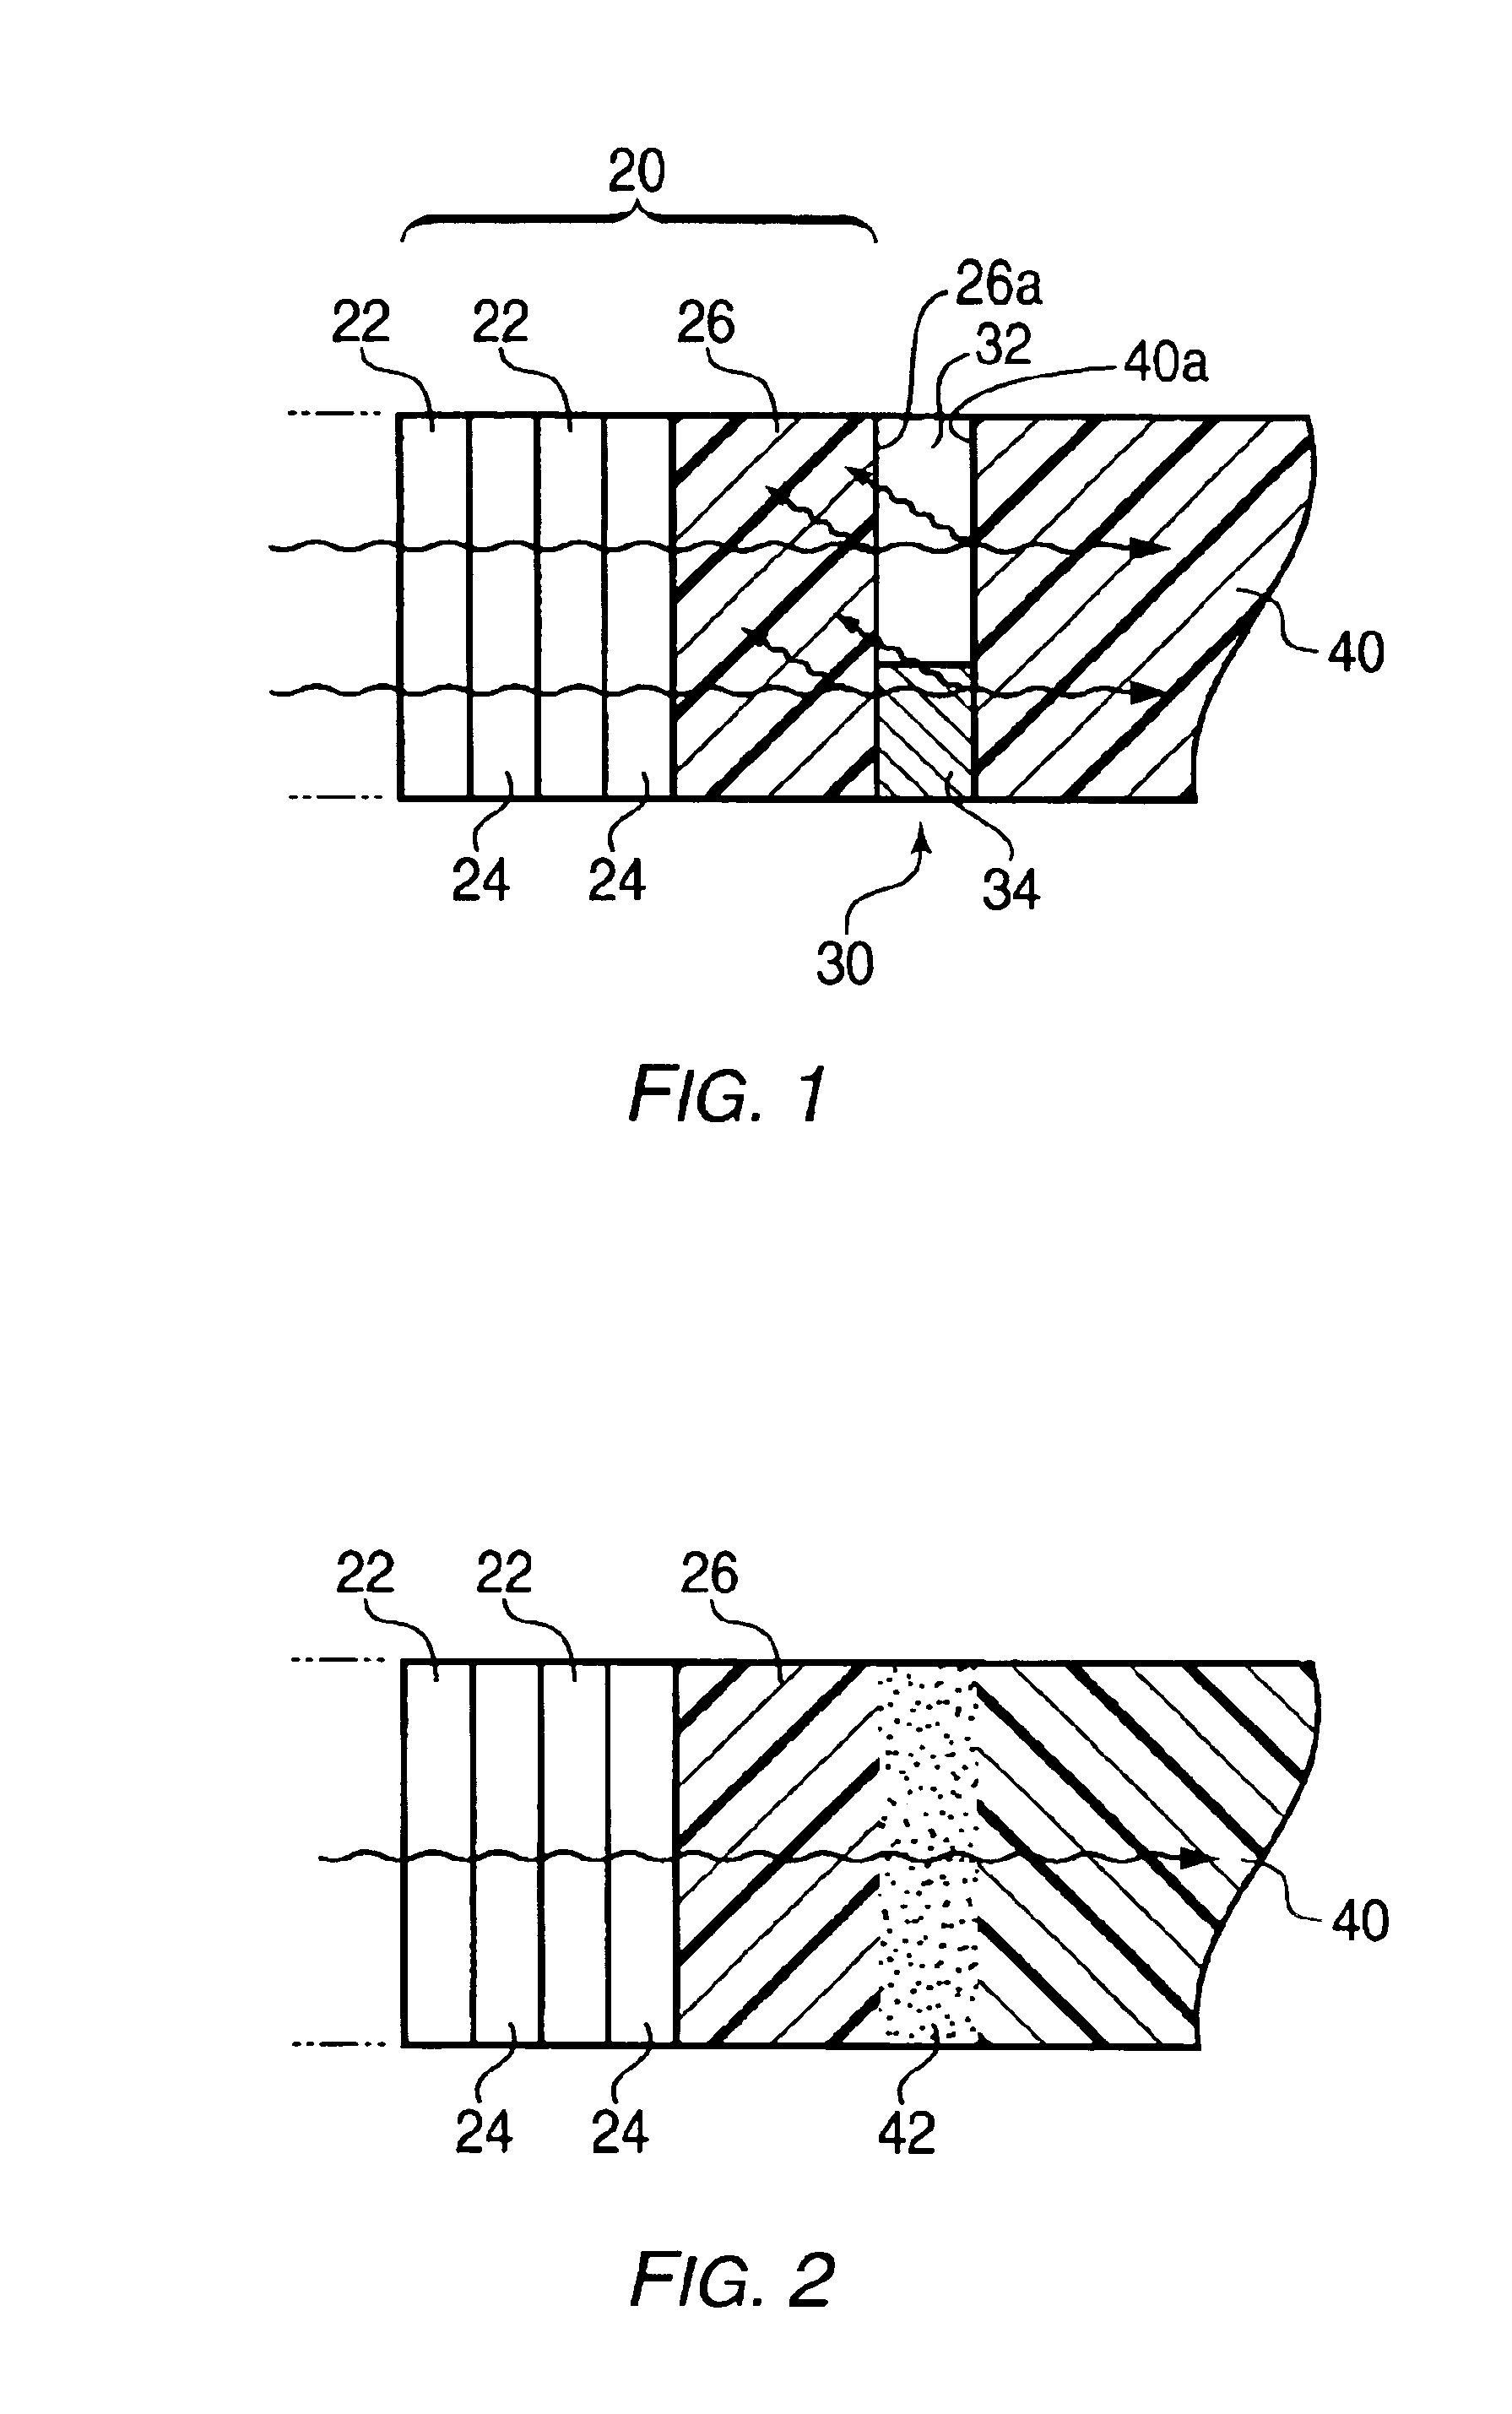 Substrate mounting for organic, dielectric, optical film